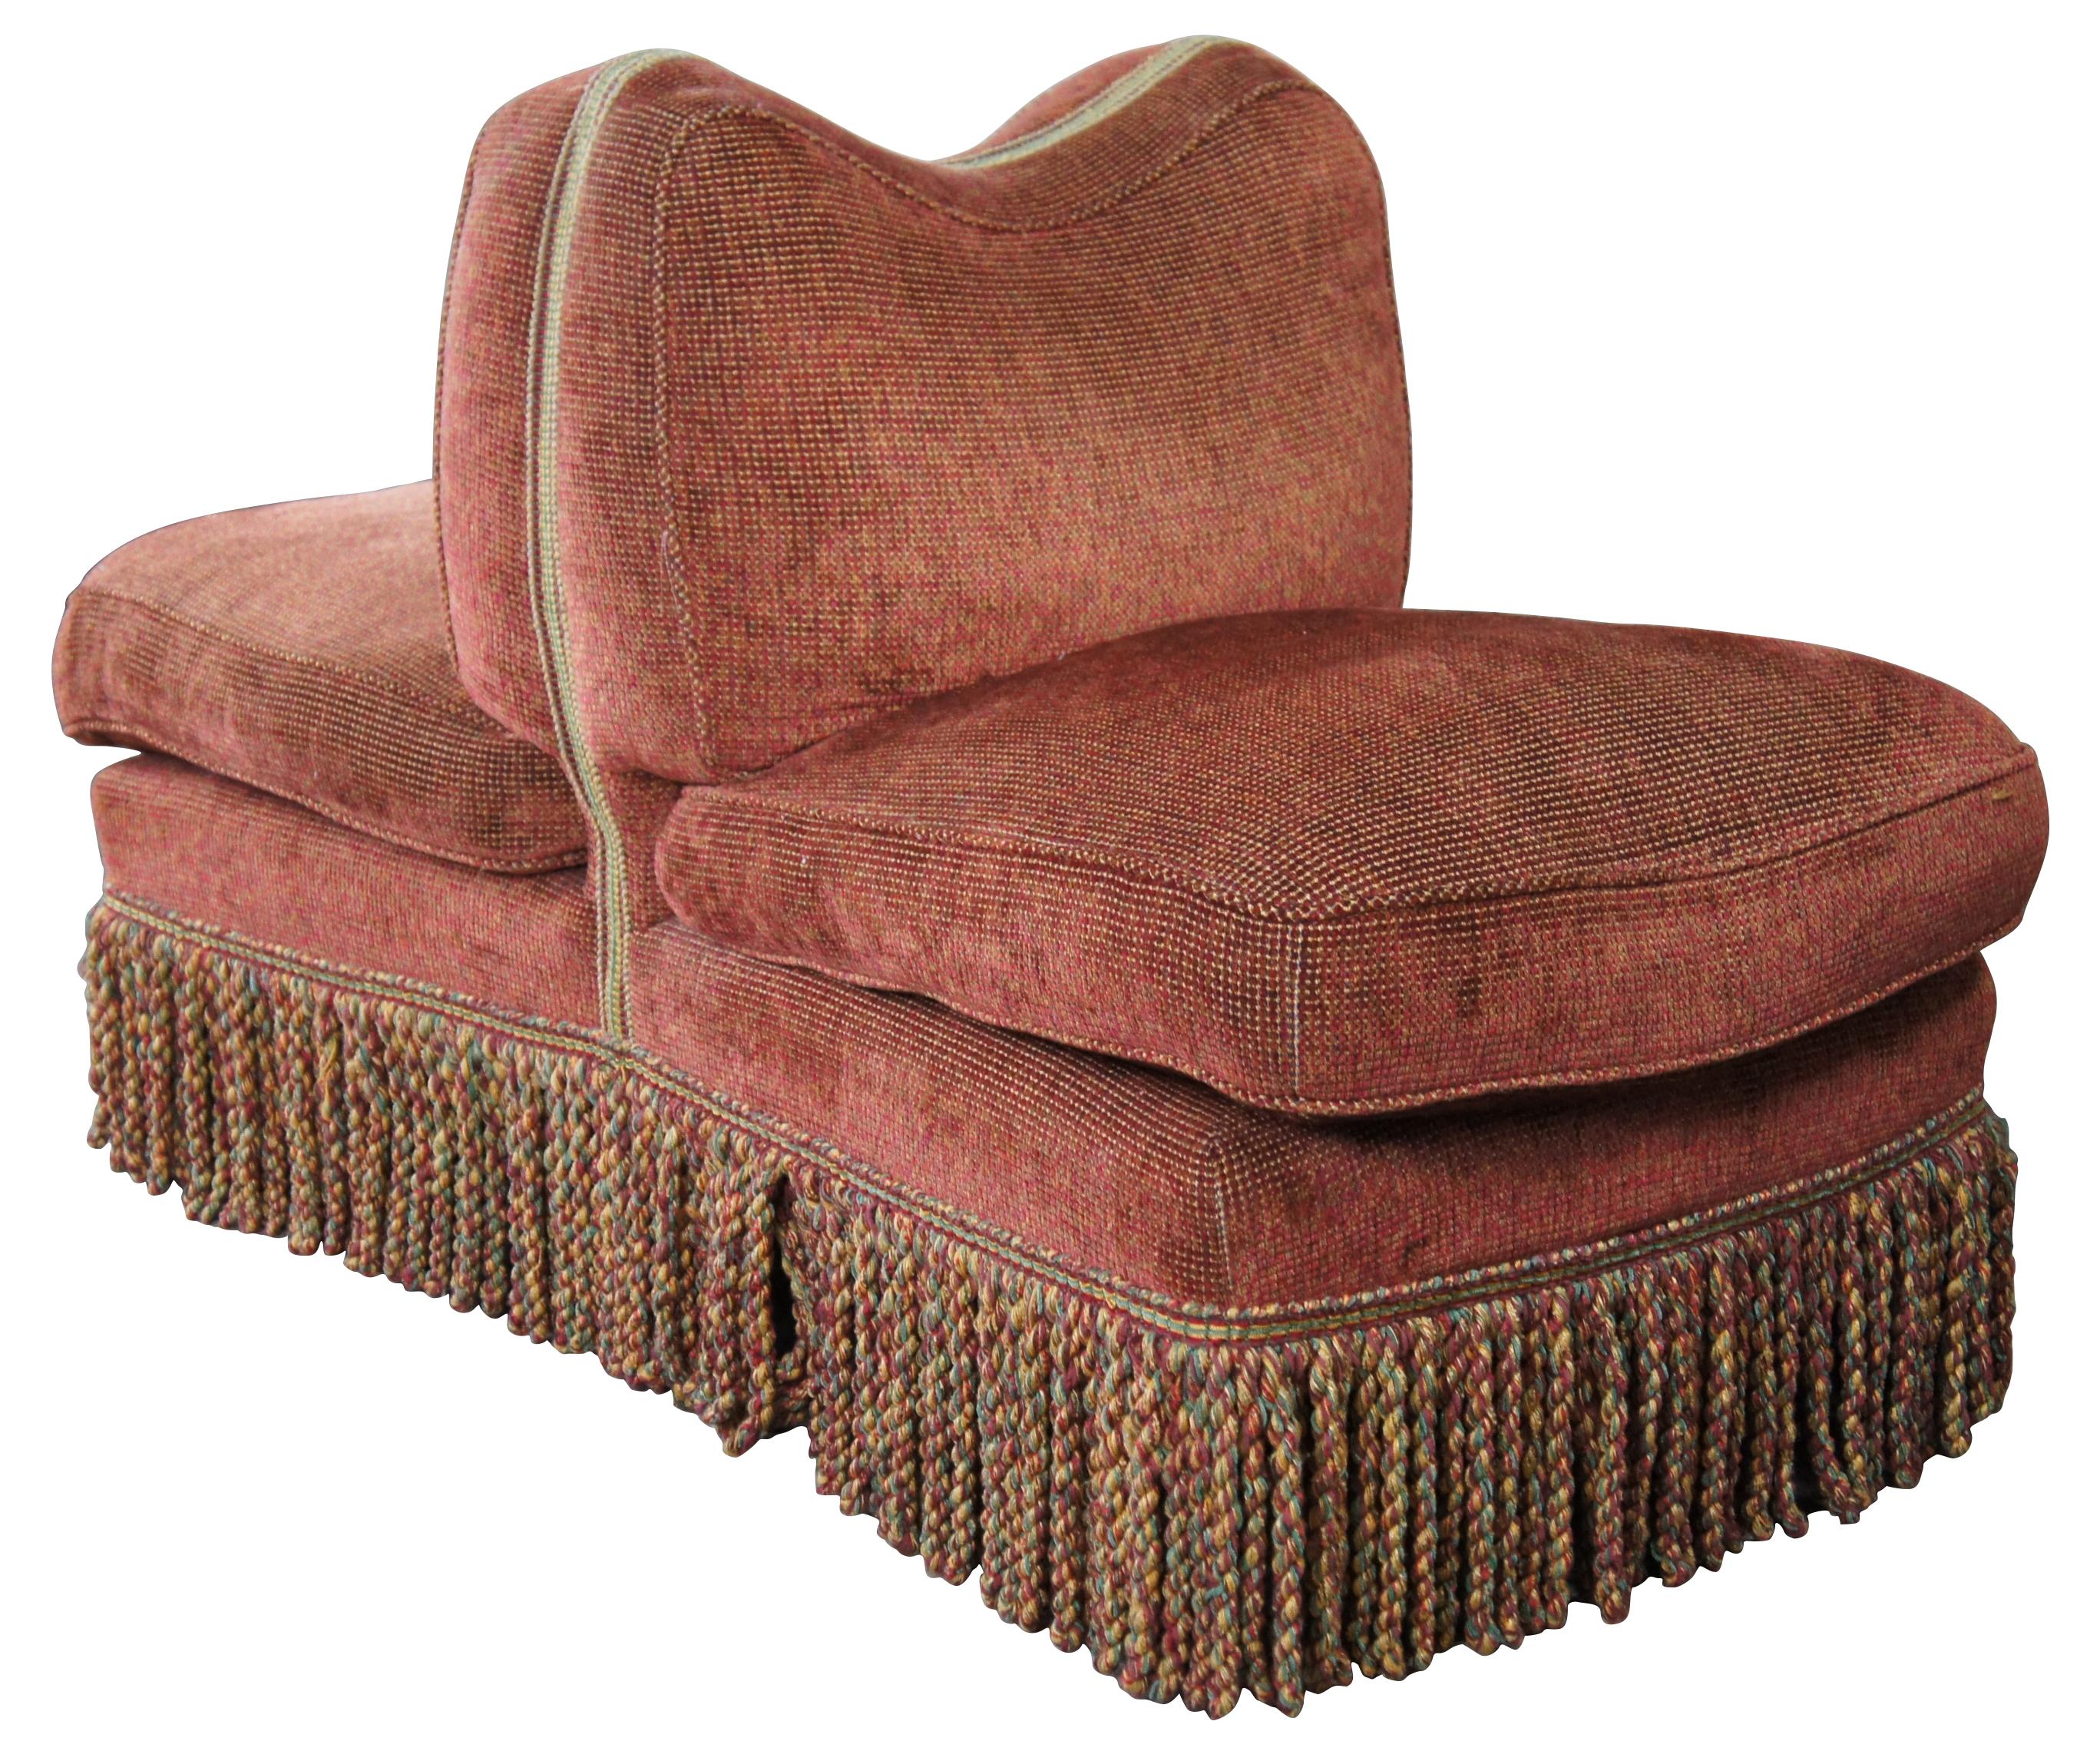 Vintage Scalamandre Tete-a-tete or settee bench chair. A unique duck down filled conversation seat featuring a sloped camelback, ornate twisted rope fringe and six legs with brass castors. Made in Hickory North Carolina, SL-3509. Measures: